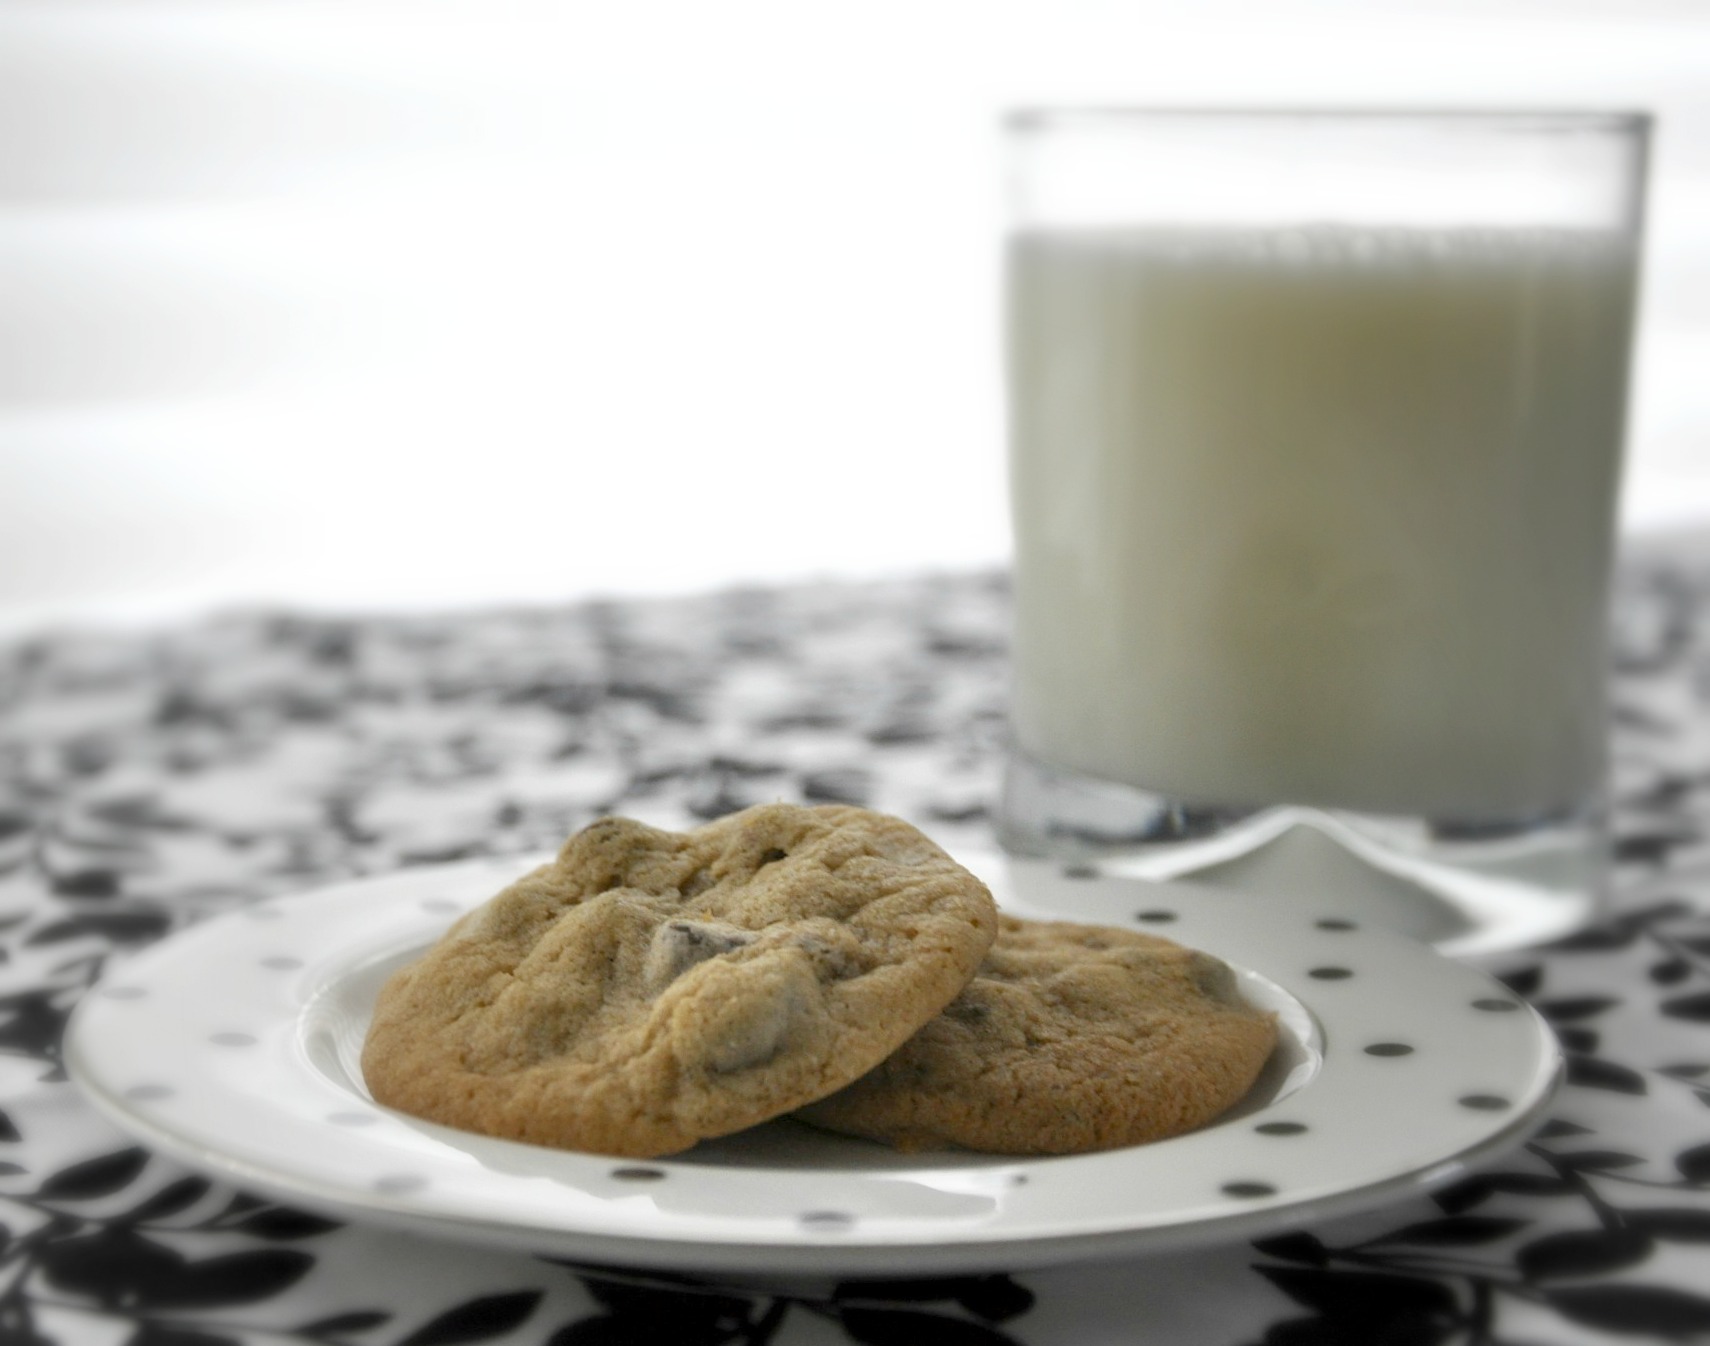 nestle toll house chocolate chip cookie recipe Archives - 2